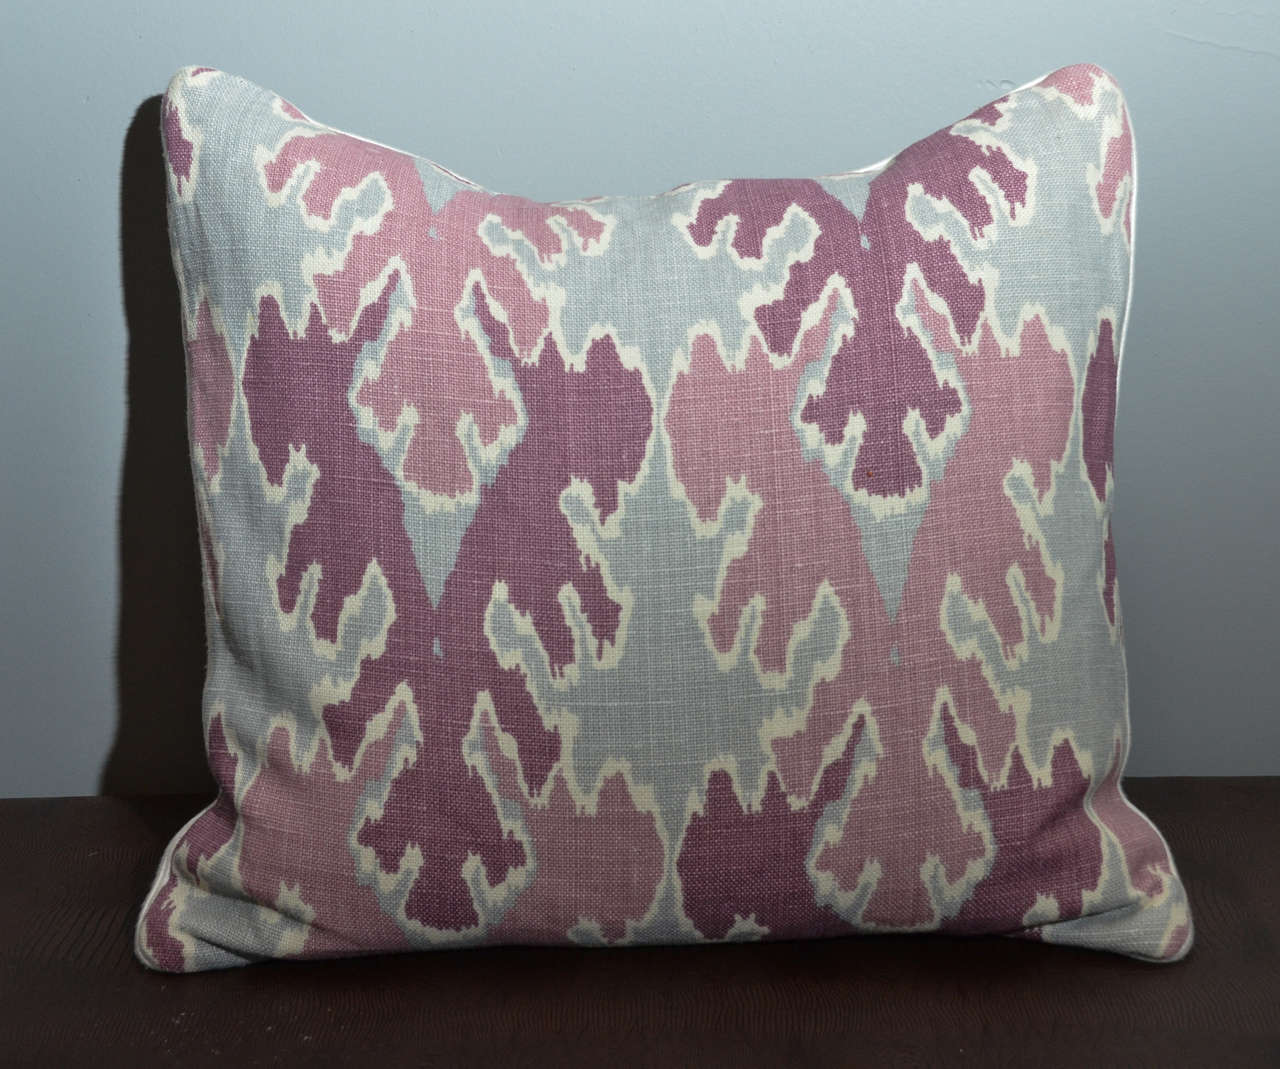 Soothing purple and gray toned Ikat patterned pillows. Top quality down insert with quality zip closure.